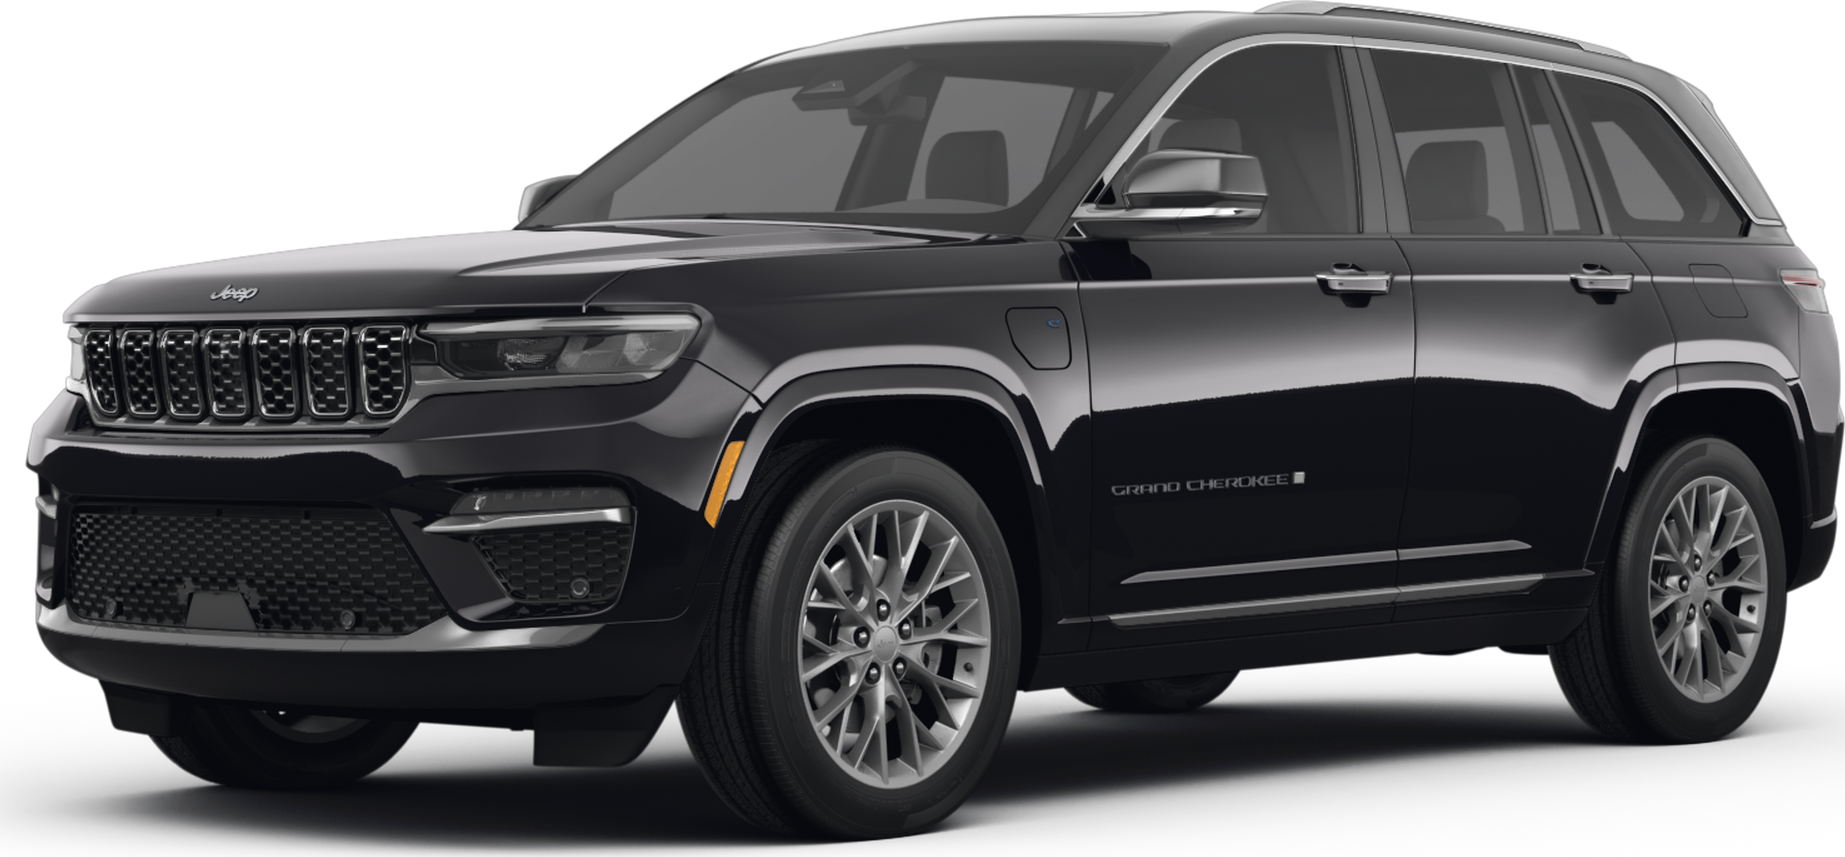 2023 Jeep® Grand Cherokee Safety & Security - Safe SUV